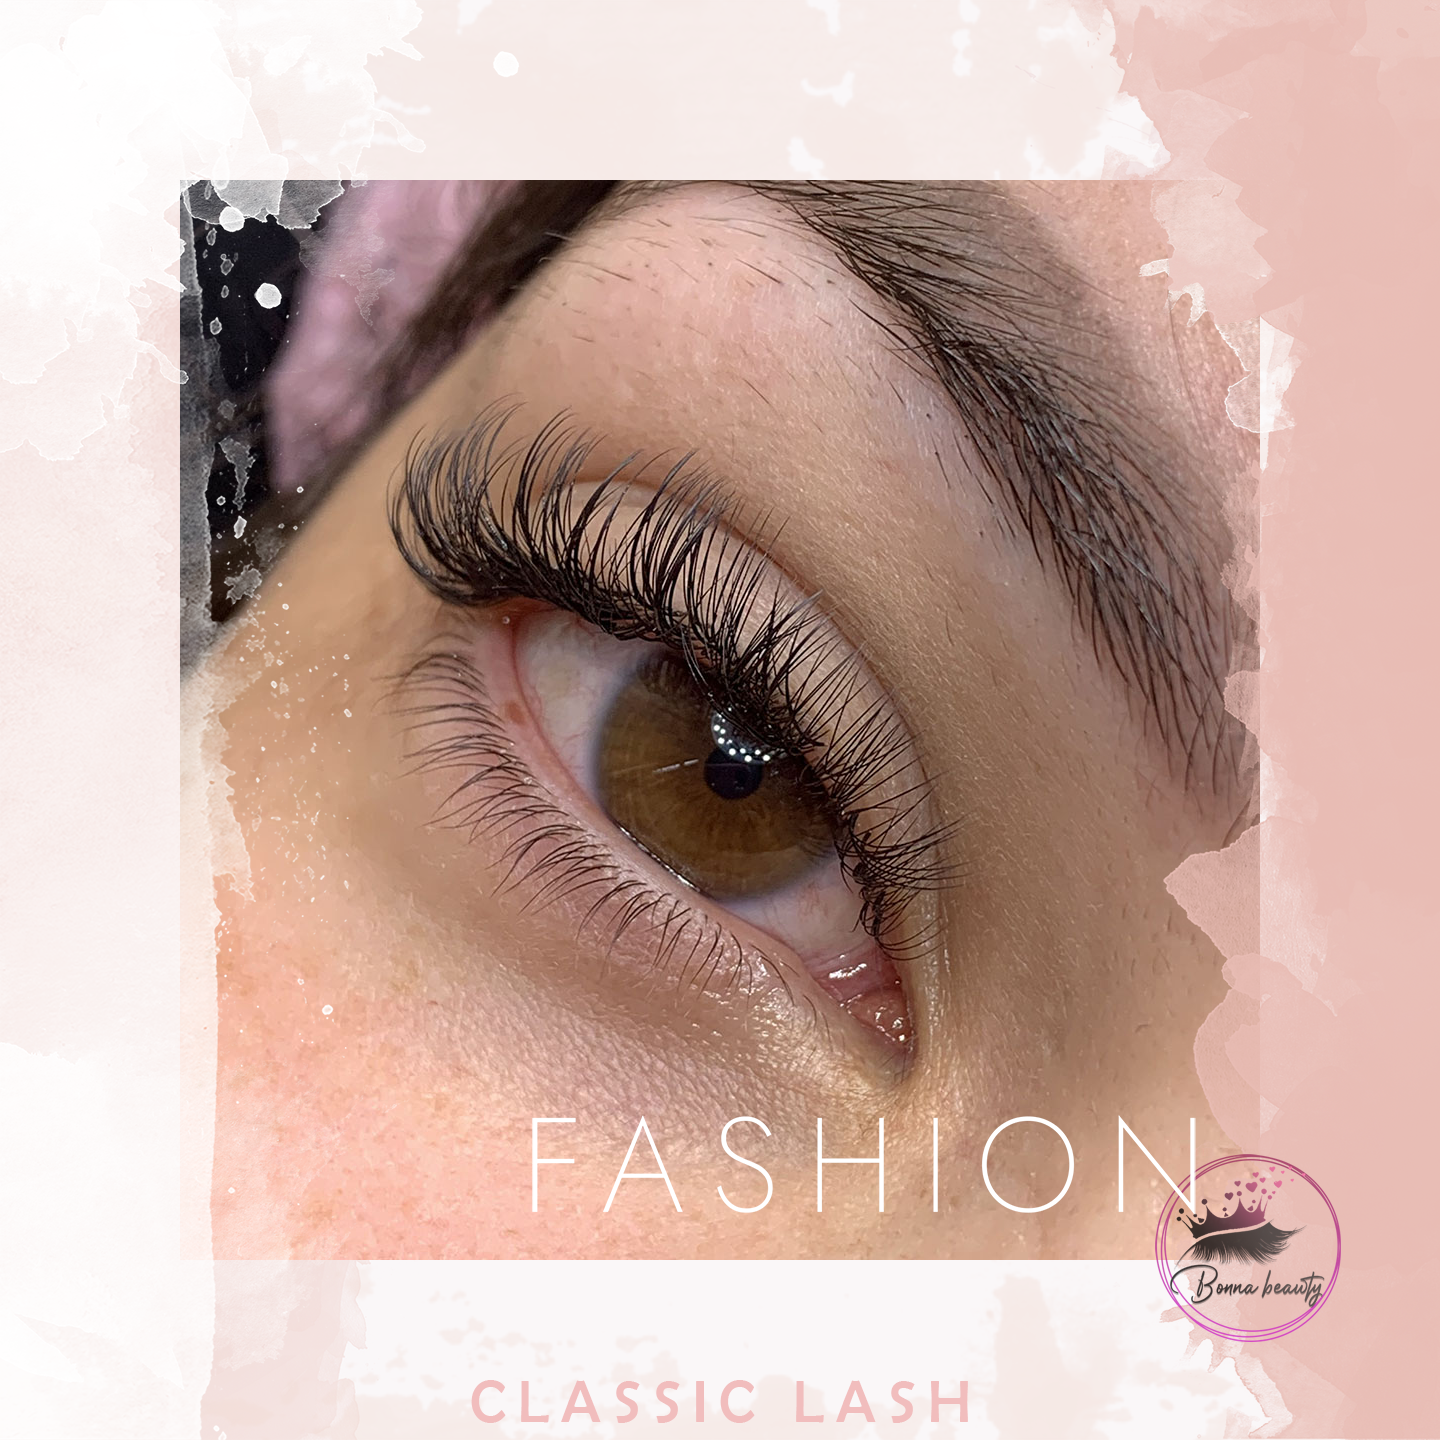 Chose best quality and services of Eyelash extensions salon in Auburn with affordable prices